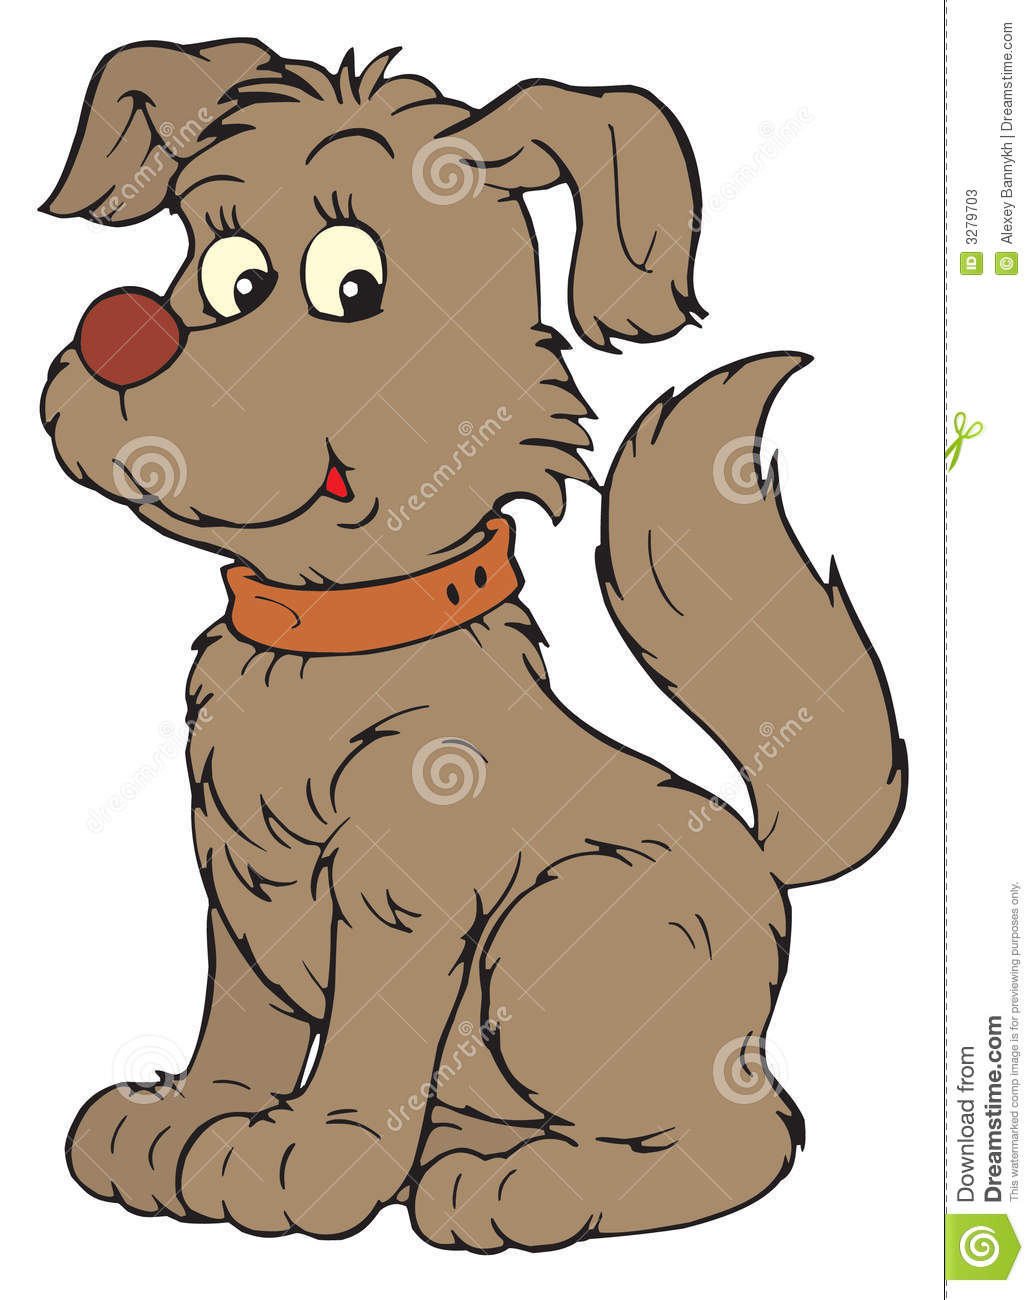 free vector clipart dogs - photo #17